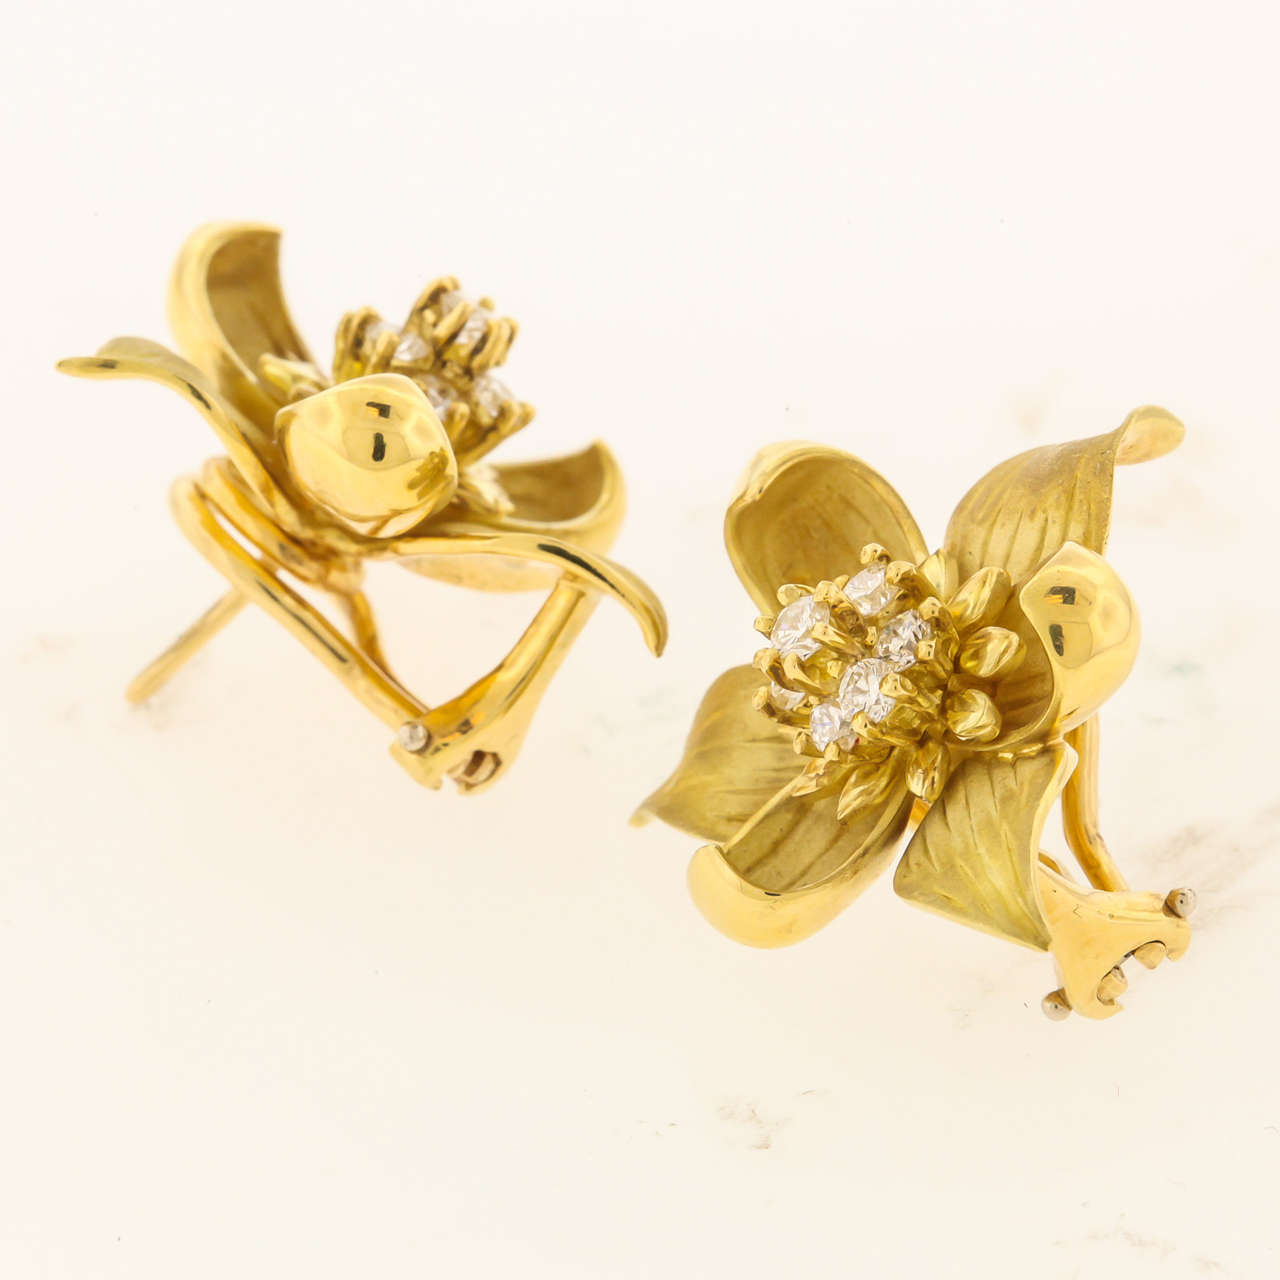 18K yellow gold flower earrings from Tiffany & Co. circa 2000,  are beautifully made and finished, inspired by the spring Trillum petals, with diamond centers, matte finished inner petals, high polished detail and backs, post and omega clips, the